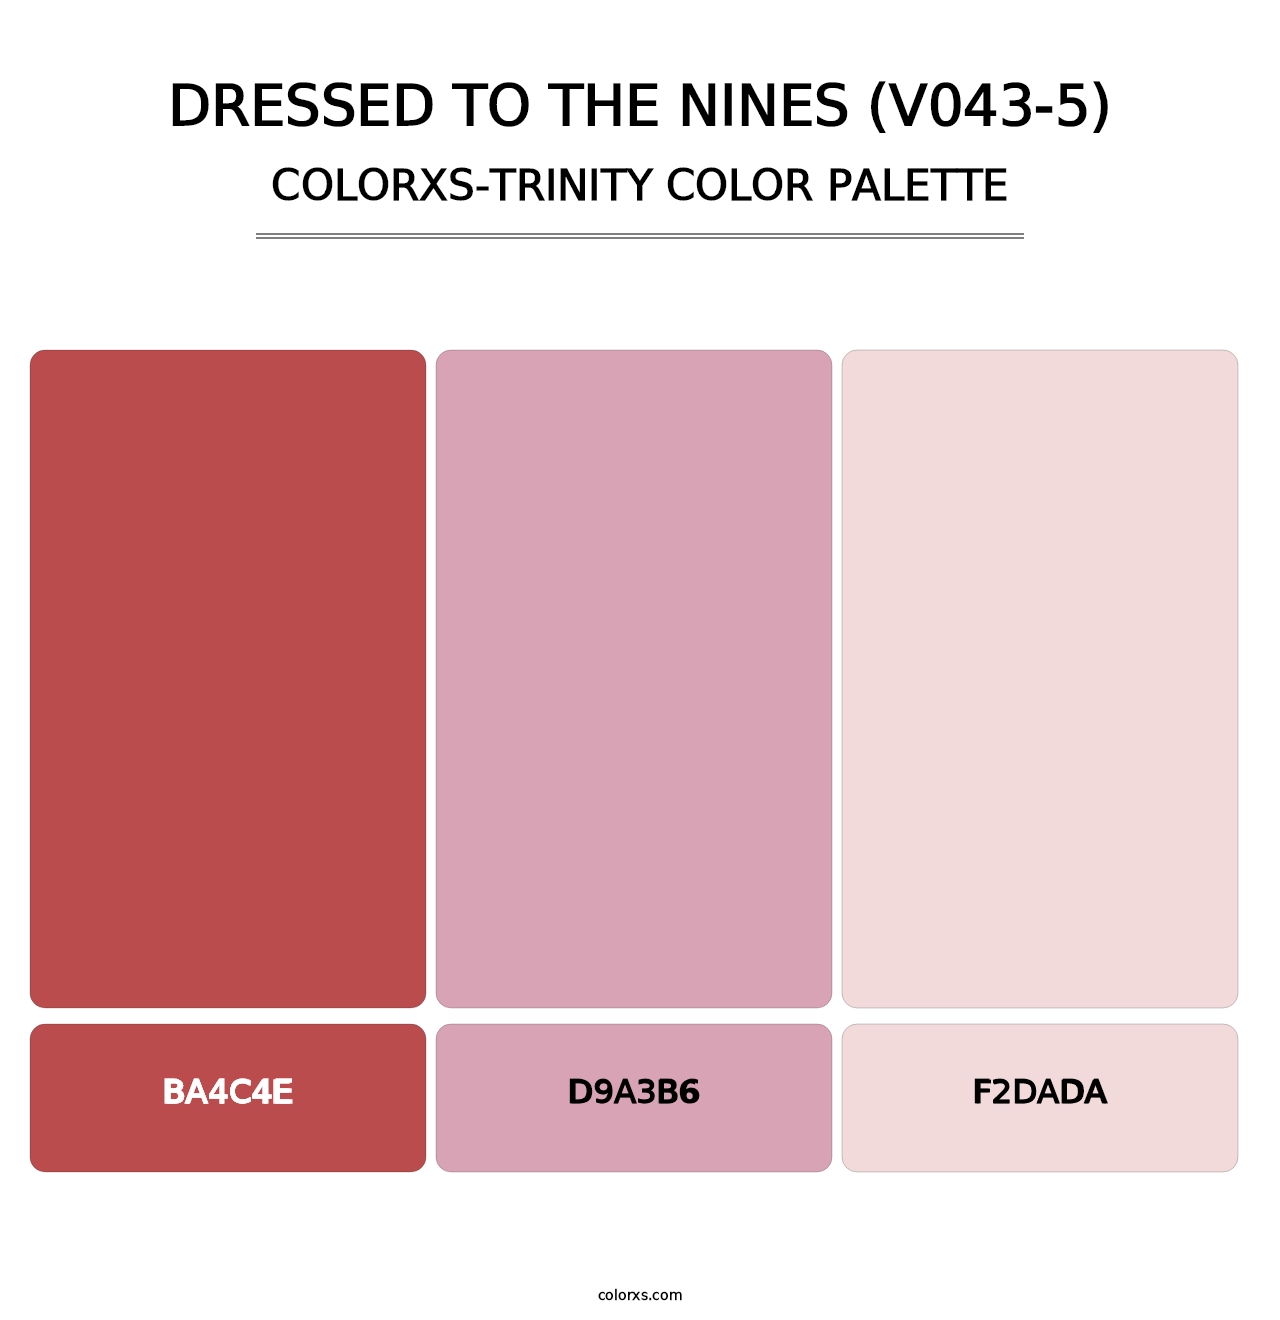 Dressed to the Nines (V043-5) - Colorxs Trinity Palette